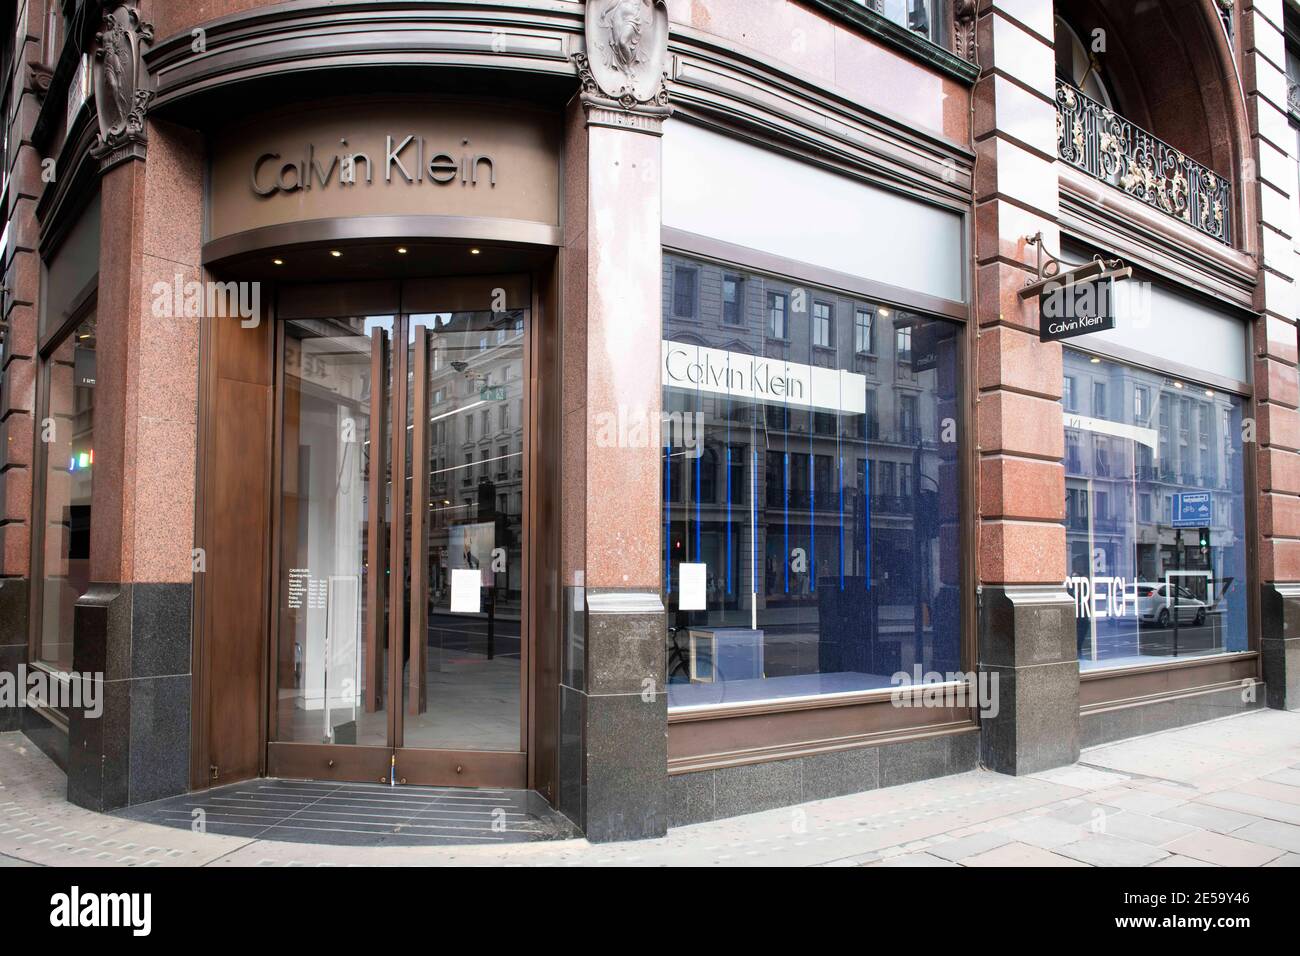 Calvin Klein empty store which has been closed since March 2020 due to the  Coronavirus pandemic and lockdown, Regent's Street, London Stock Photo -  Alamy